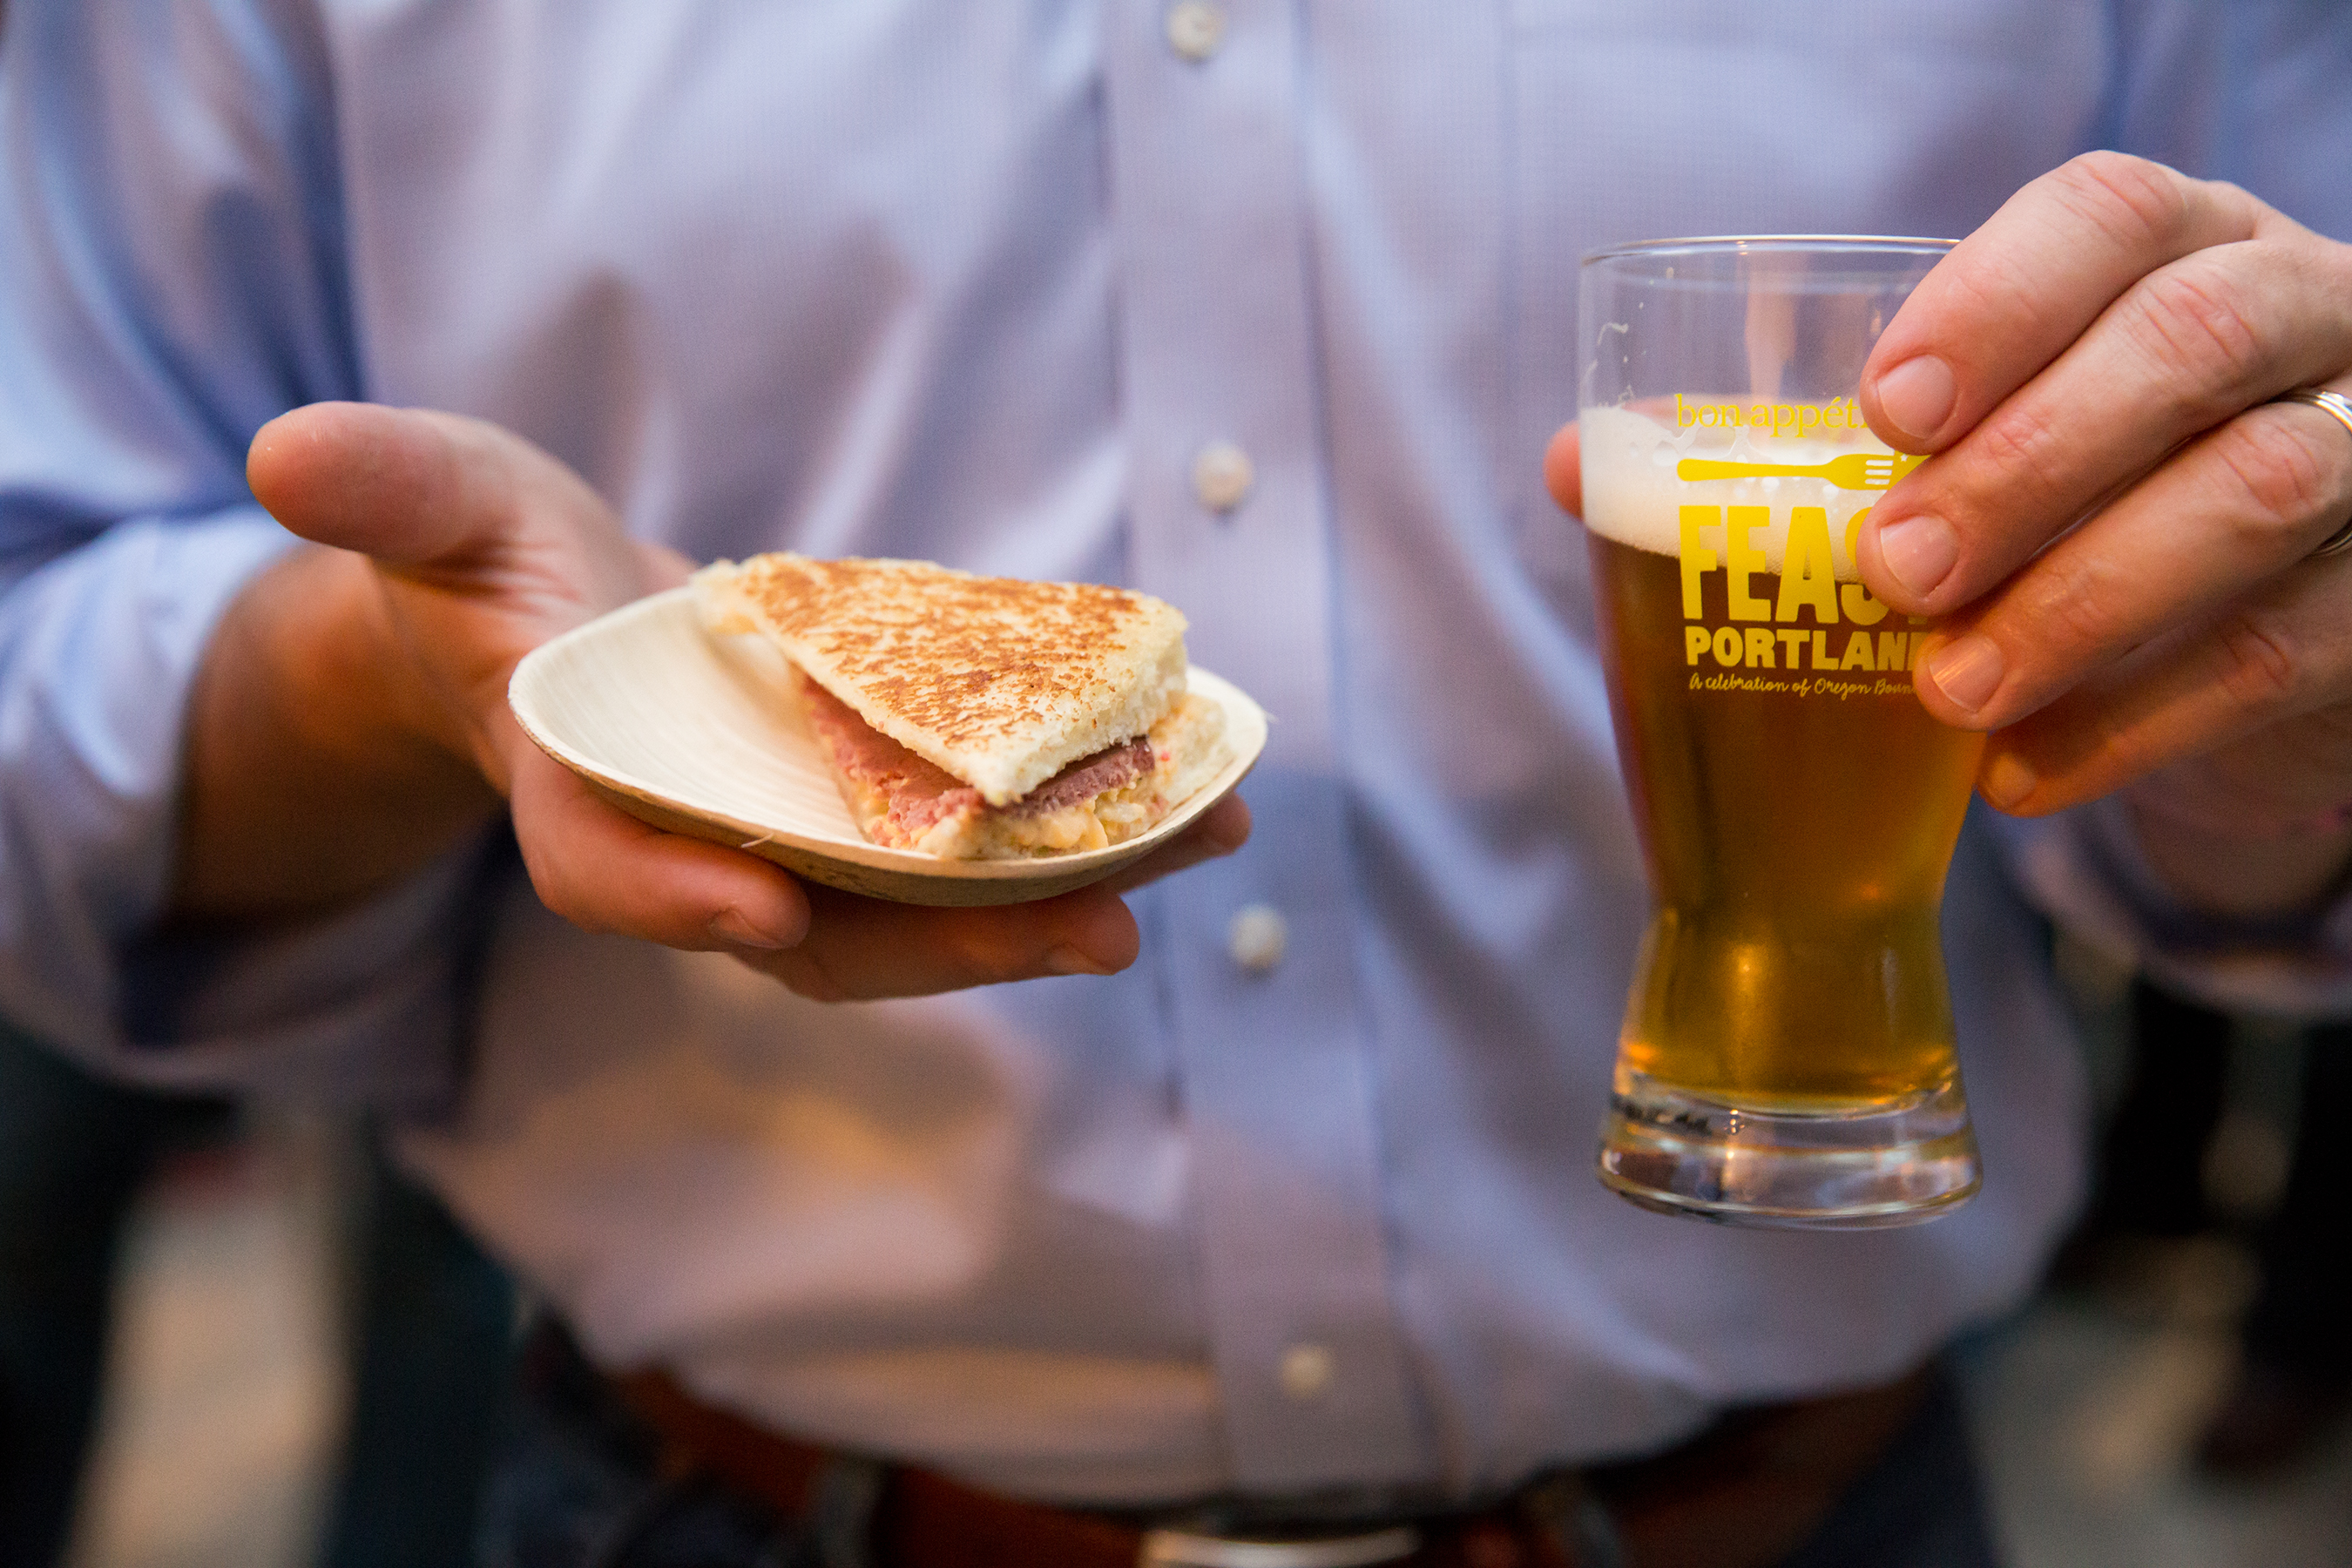 Feast Sandwich and beer